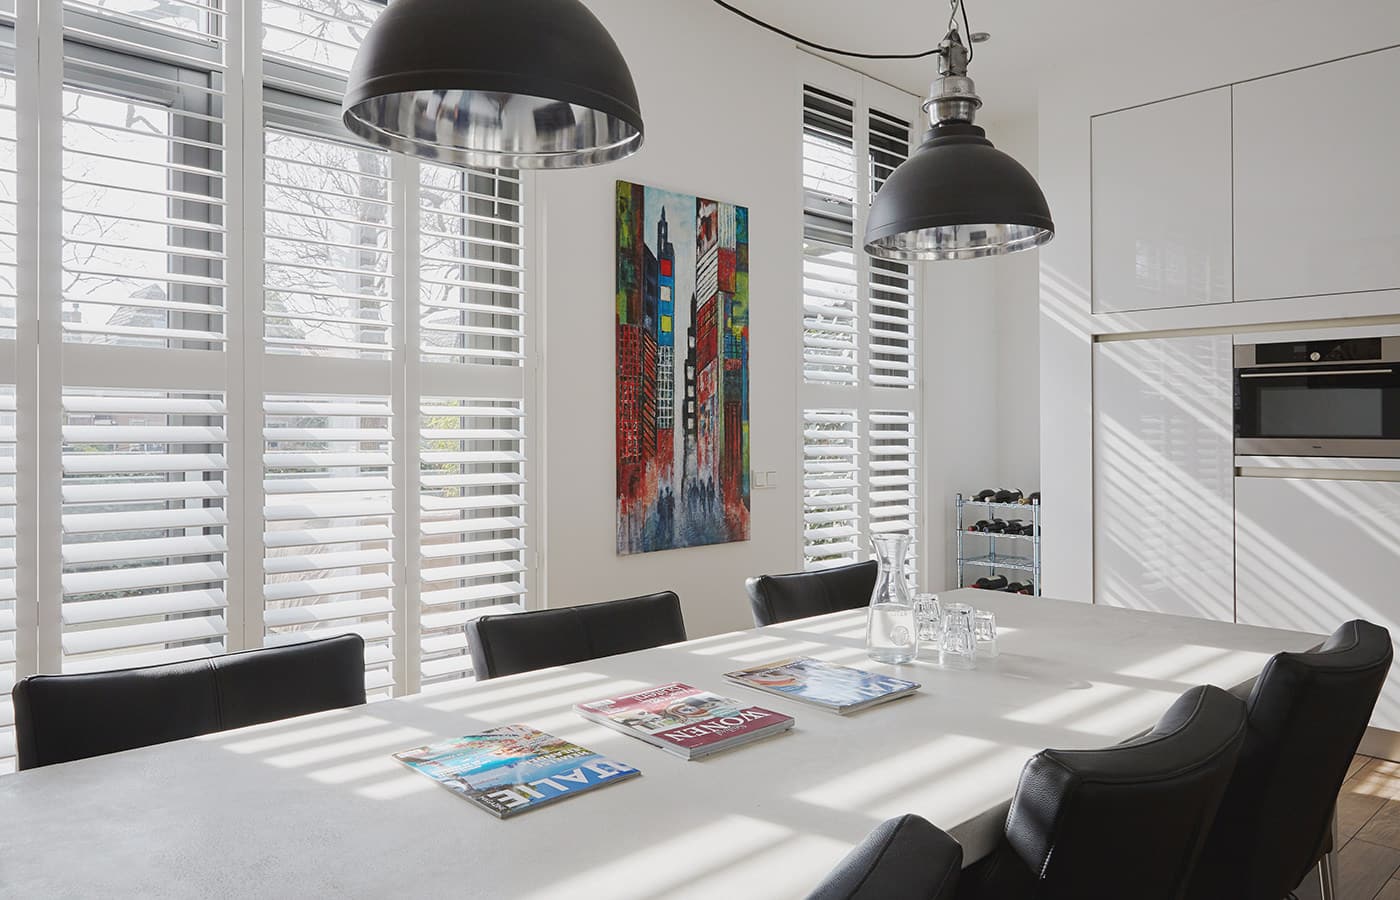 Contemporary kitchen design featuring Luxaflex Motorised Somfy shutters, ensuring opening and closing at the right position and time for optimum heat gain and losses. For sale in our Sydney showroom.